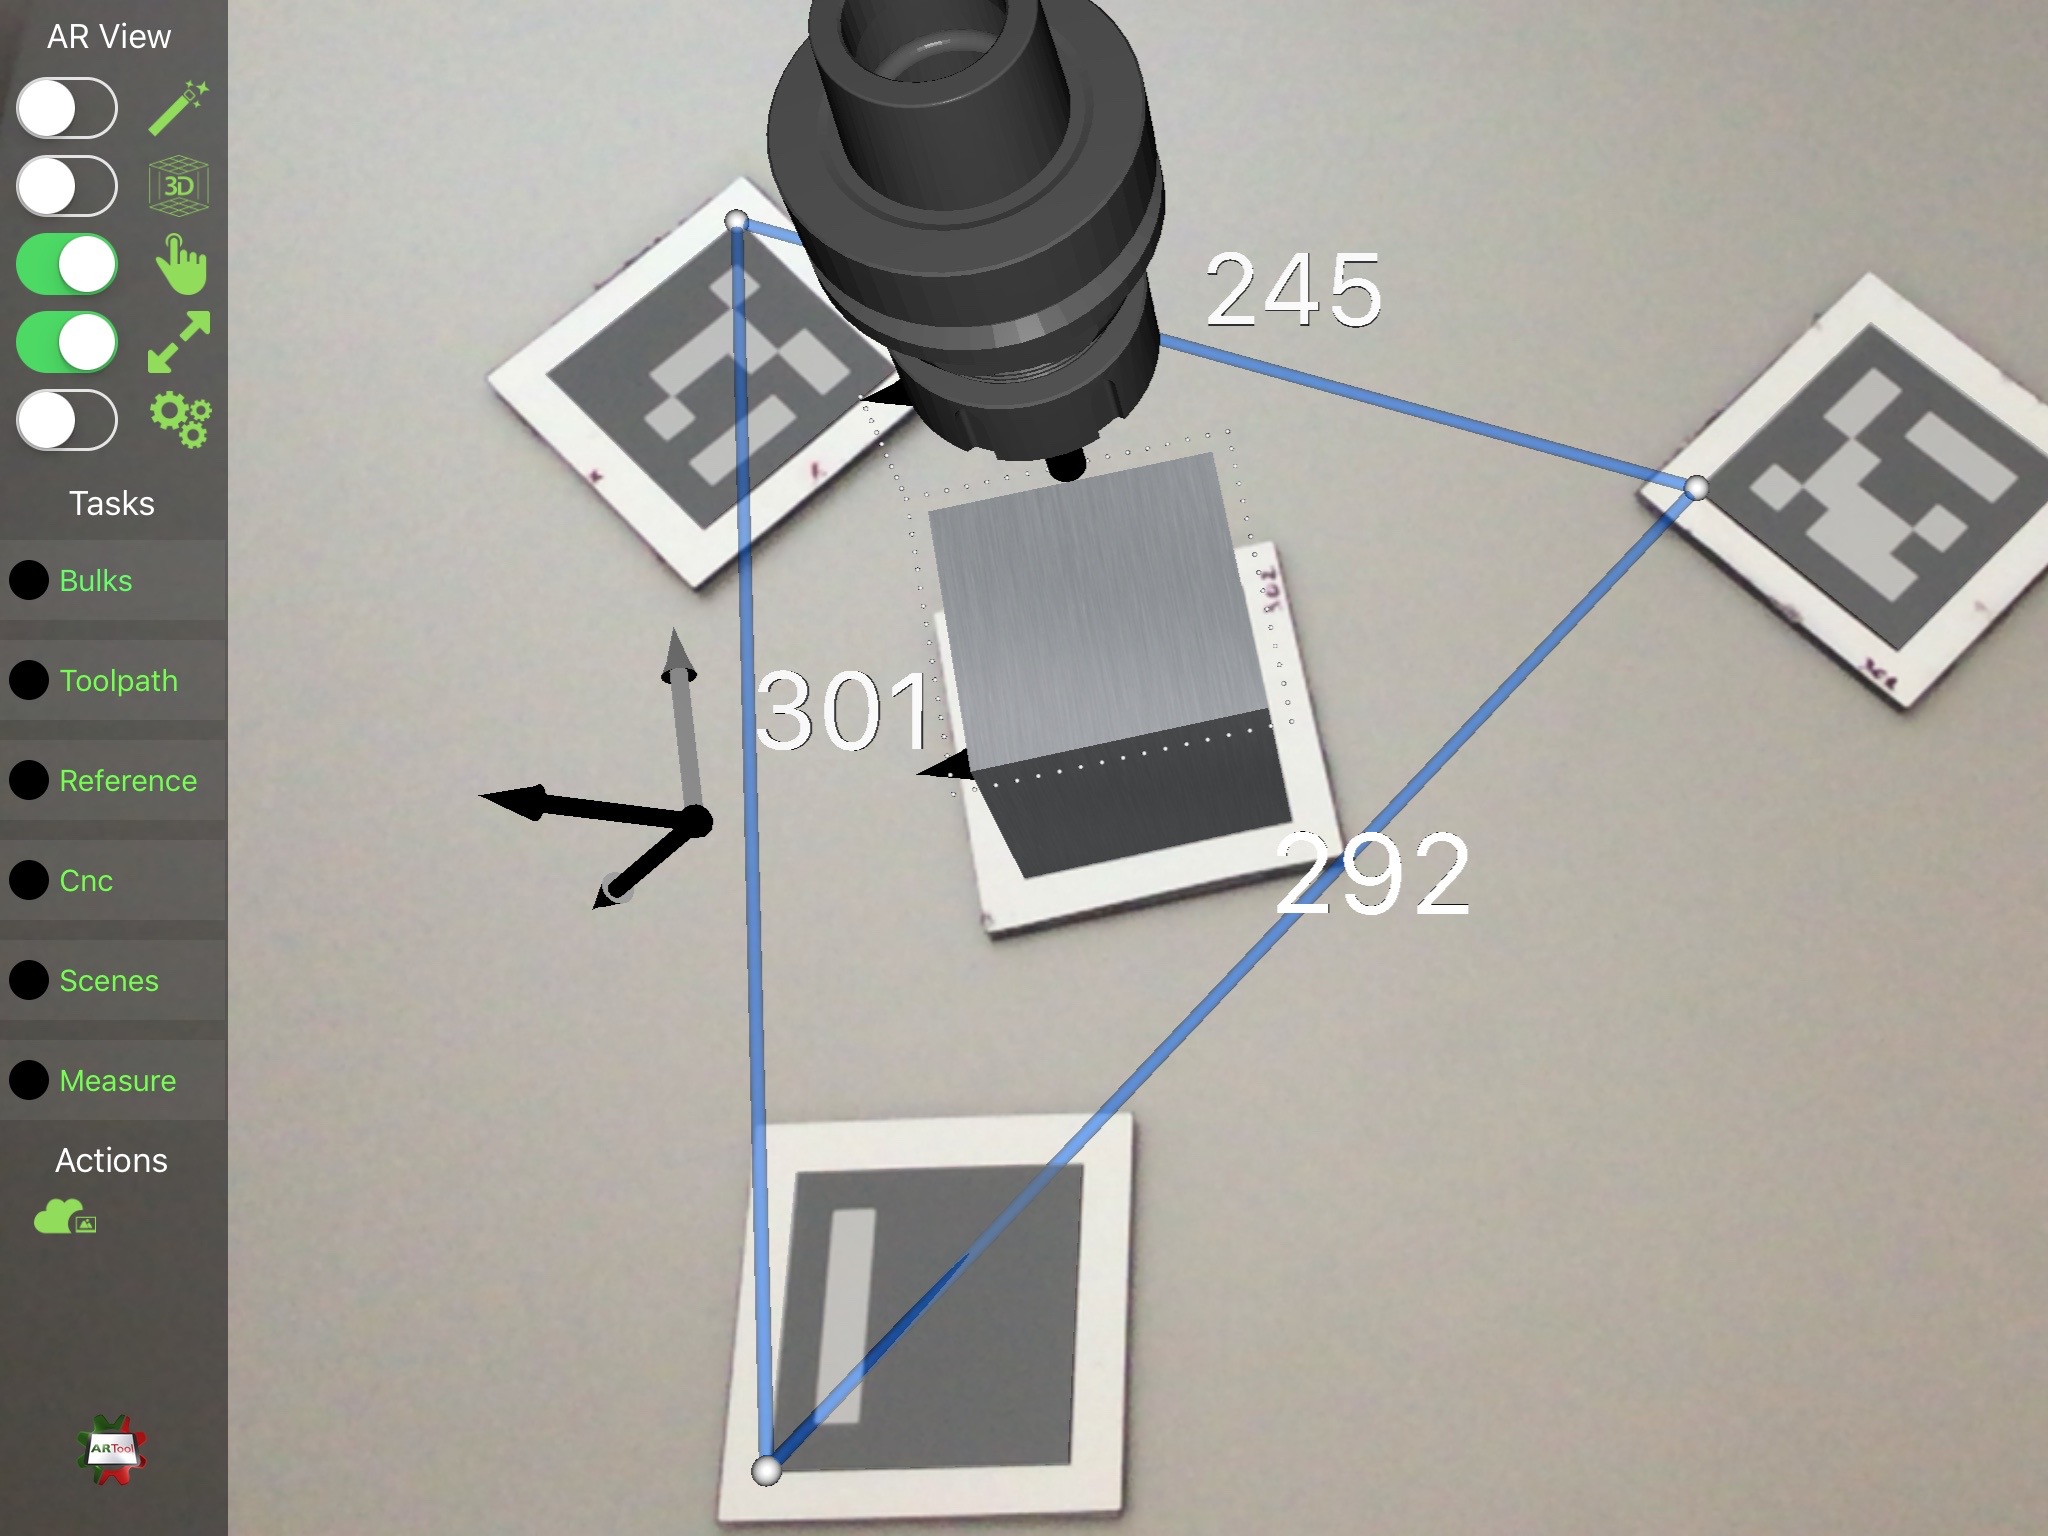 Screenshot of ARTool iPad app, showing the setup-mode augmented reality view. In this case, three markers are used for measuring distances, while the central one provides ego-localization to the device camera and its position provides the reference for rendering the tool holder, the block-form, and the toolpath (as a sequence of white dots)